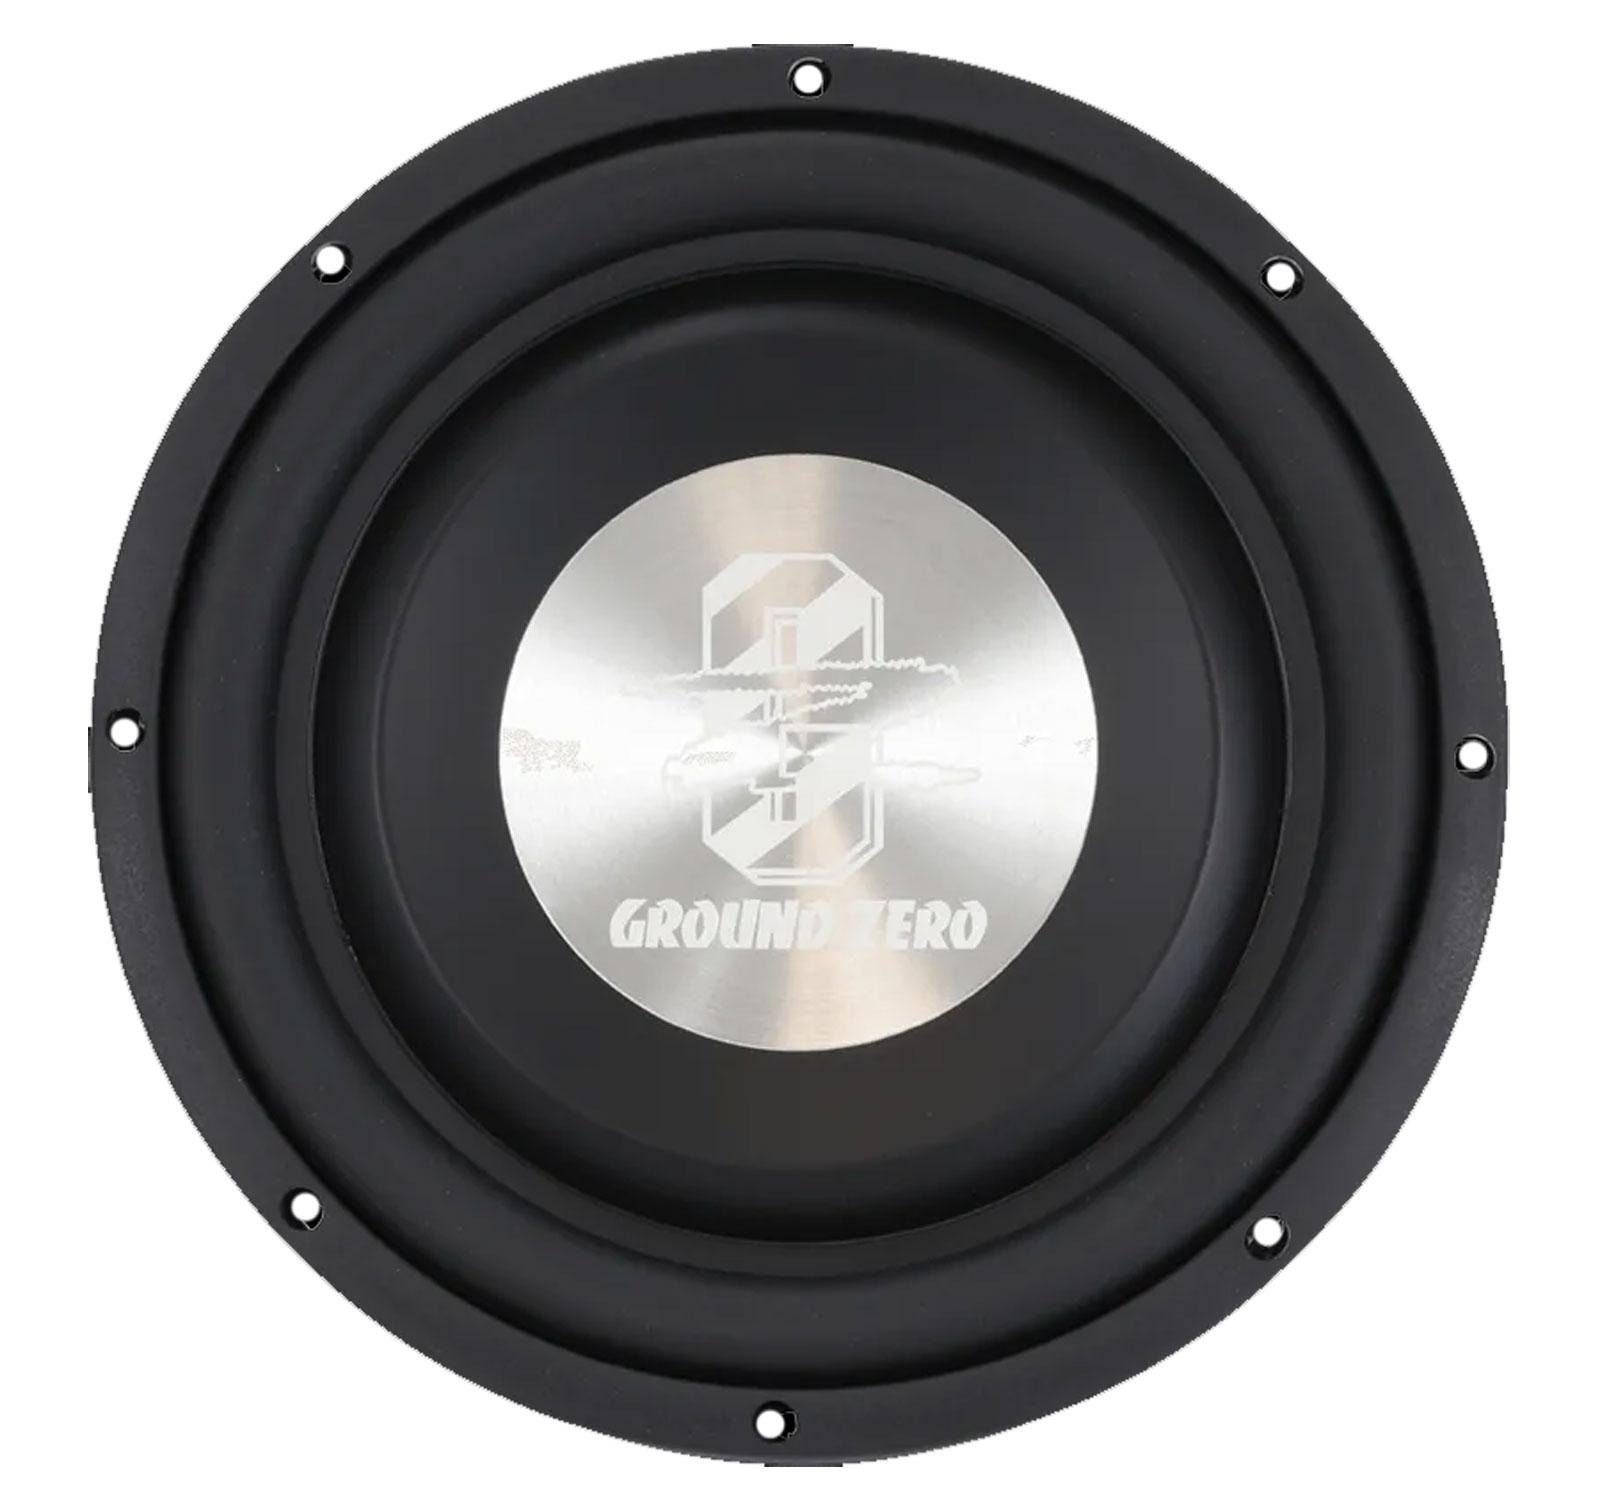 Flach-Subwoofer Auto-Subwoofer Ground cm 300 GZTW 25 High-Quality Watt Zero 10F Chassis RMS